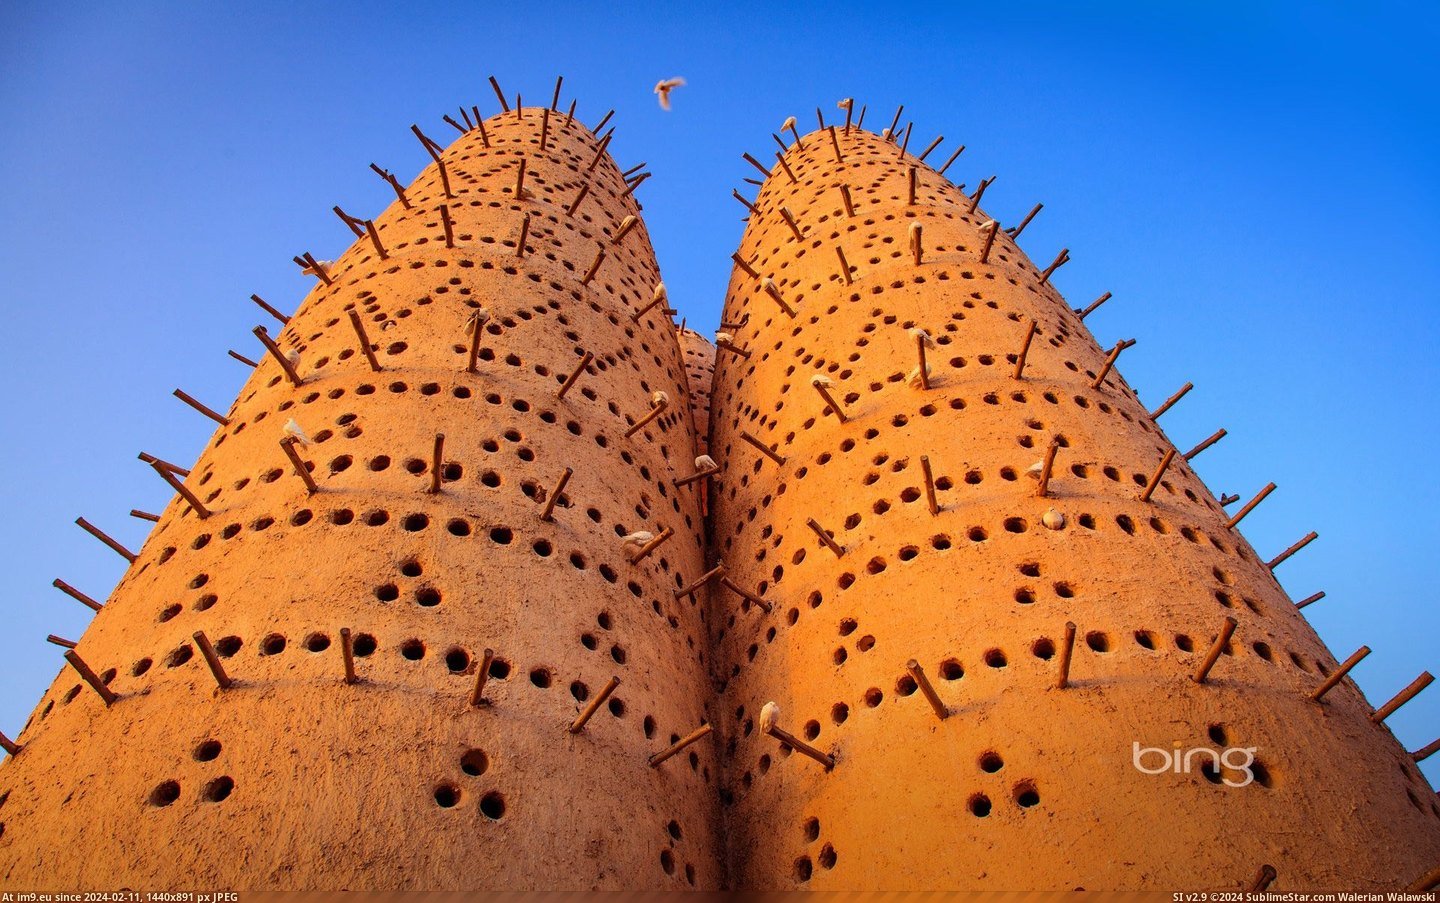 Dovecotes in the Katara Cultural Village in Doha, Qatar (© Getty Images) (in Best photos of February 2013)